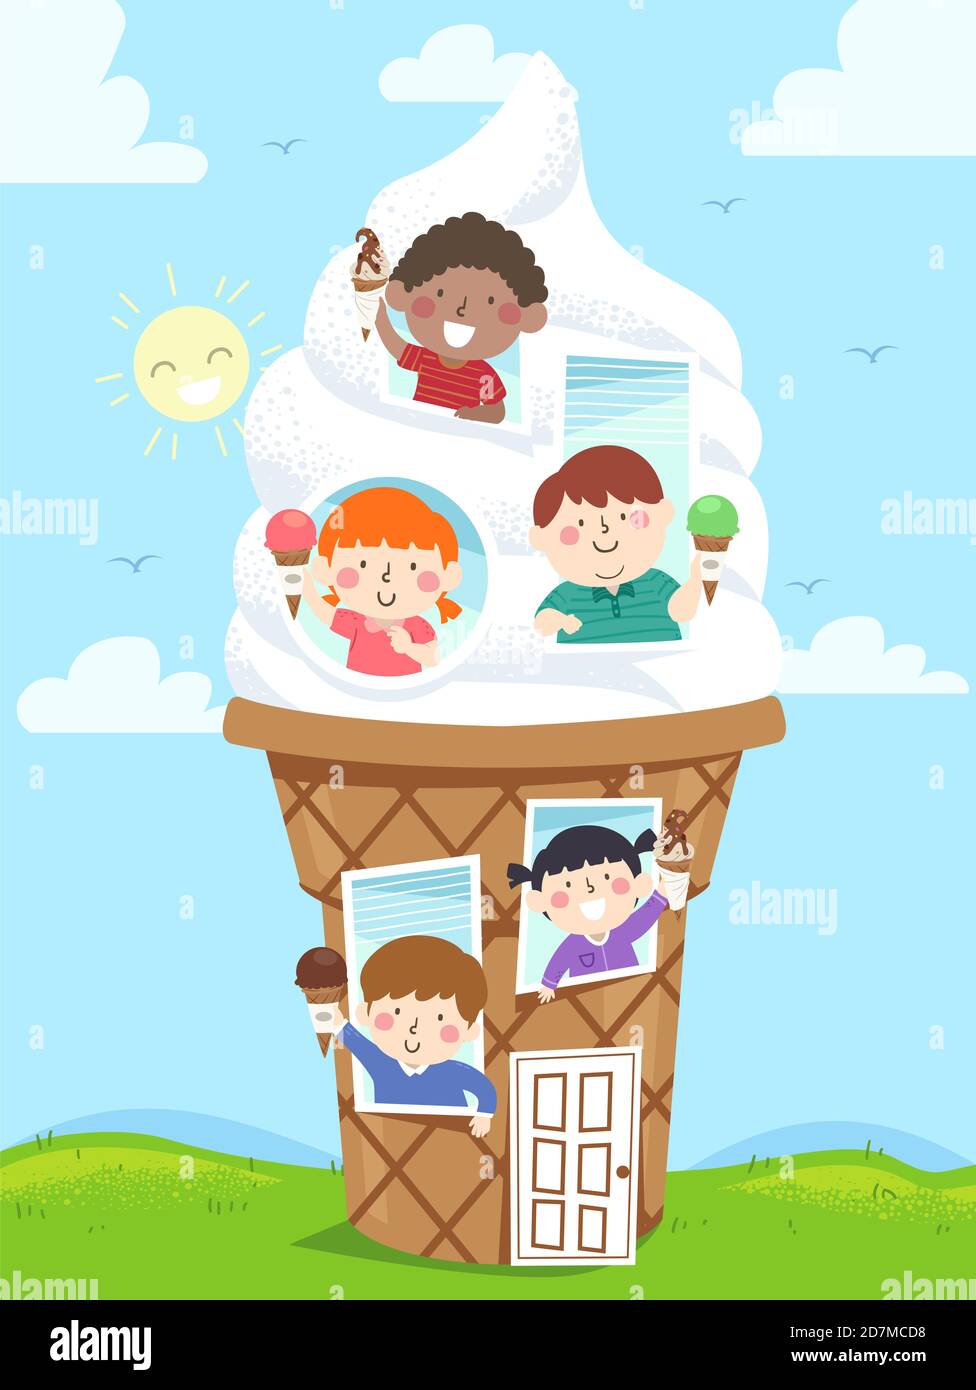 Illustration of Kids Holding Ice Cream Scoop on Cone From Inside a Sundae  House Stock Photo - Alamy